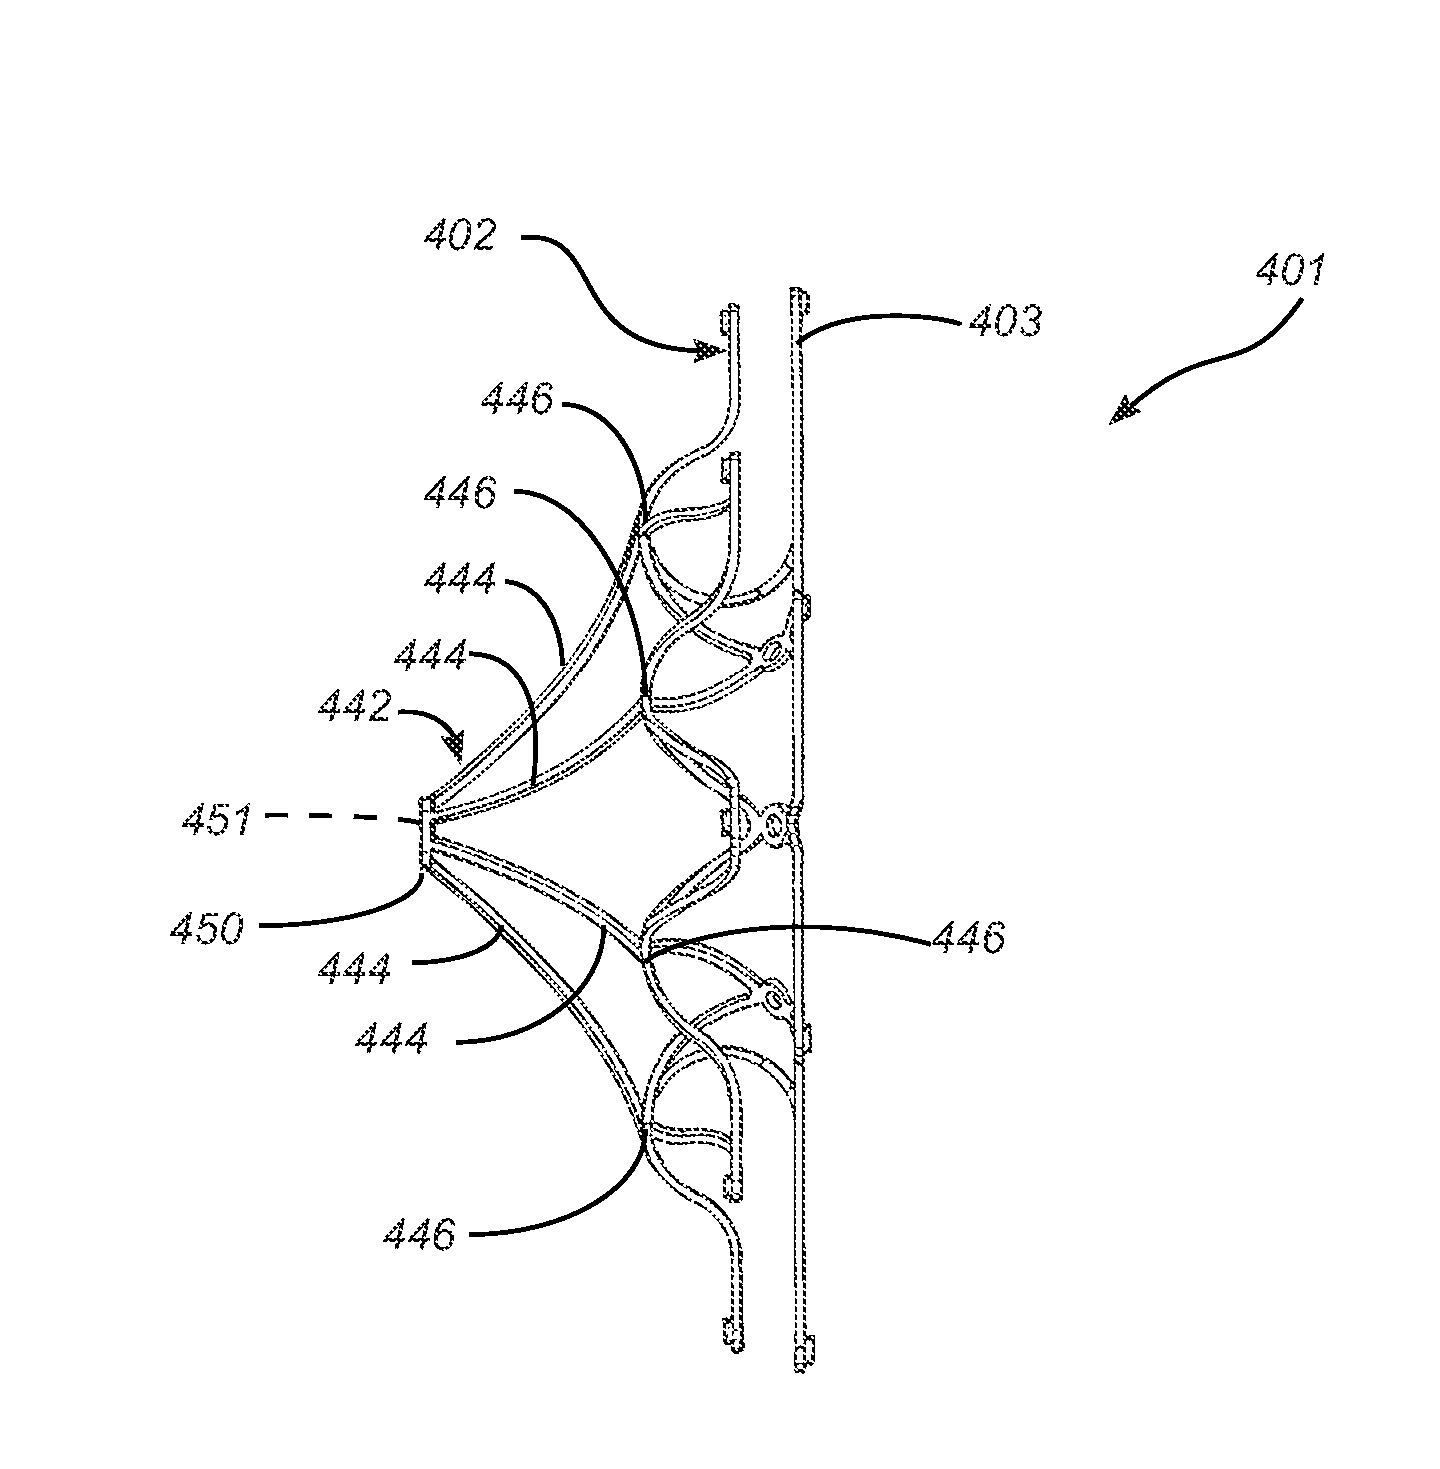 Prosthesis for reducing intra-cardiac pressure having an embolic filter